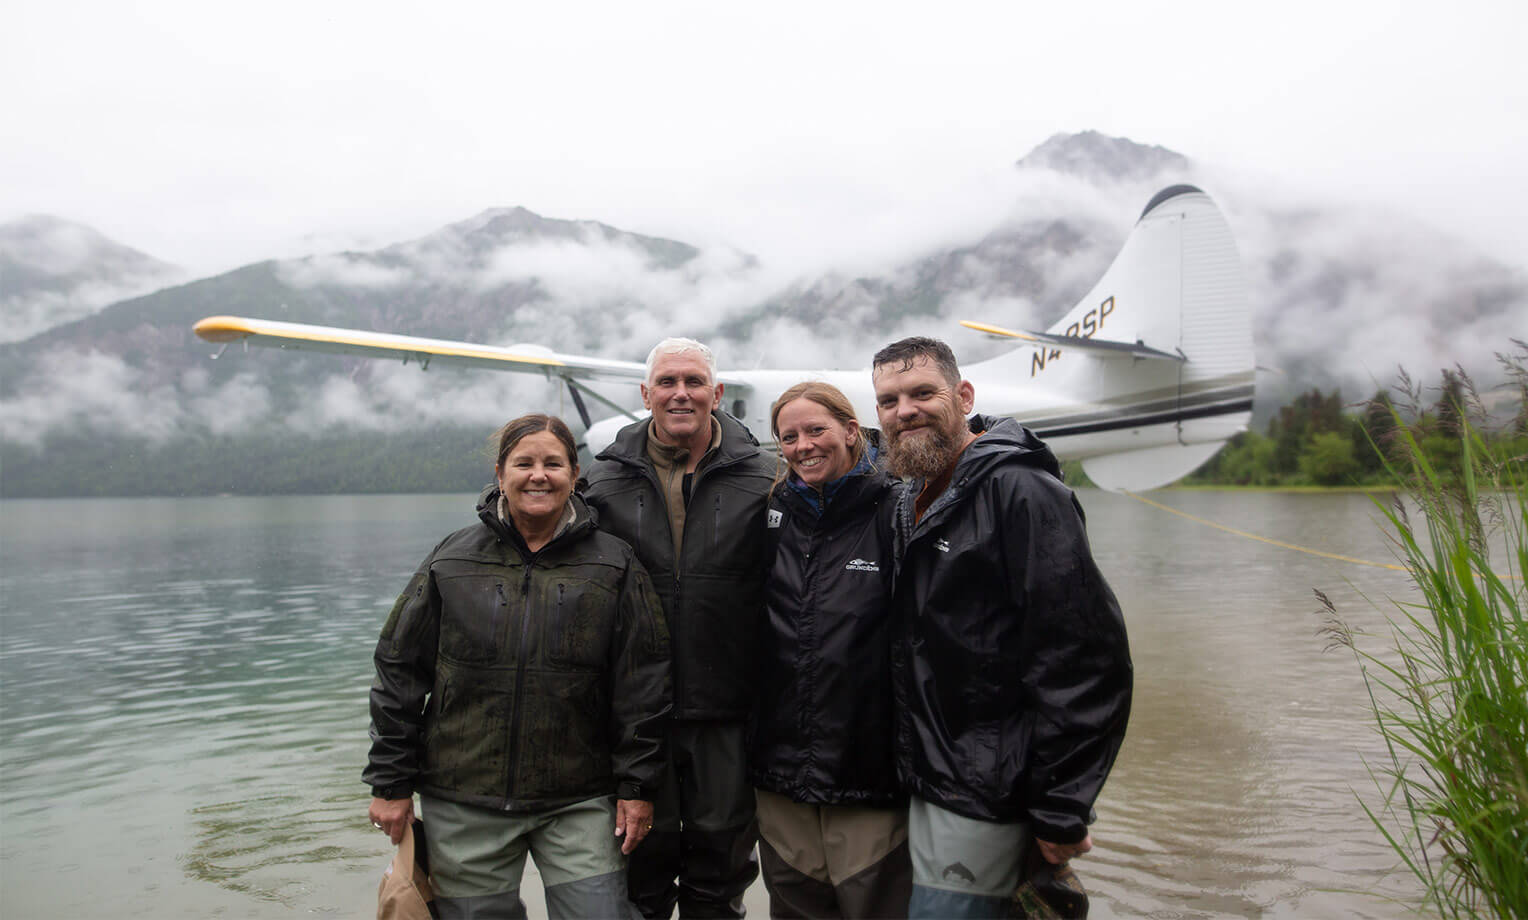 The Pences went on an expedition to the Kijik River with couples including Army Chief Warrant Officer 3 Ryan and Staci Groves.